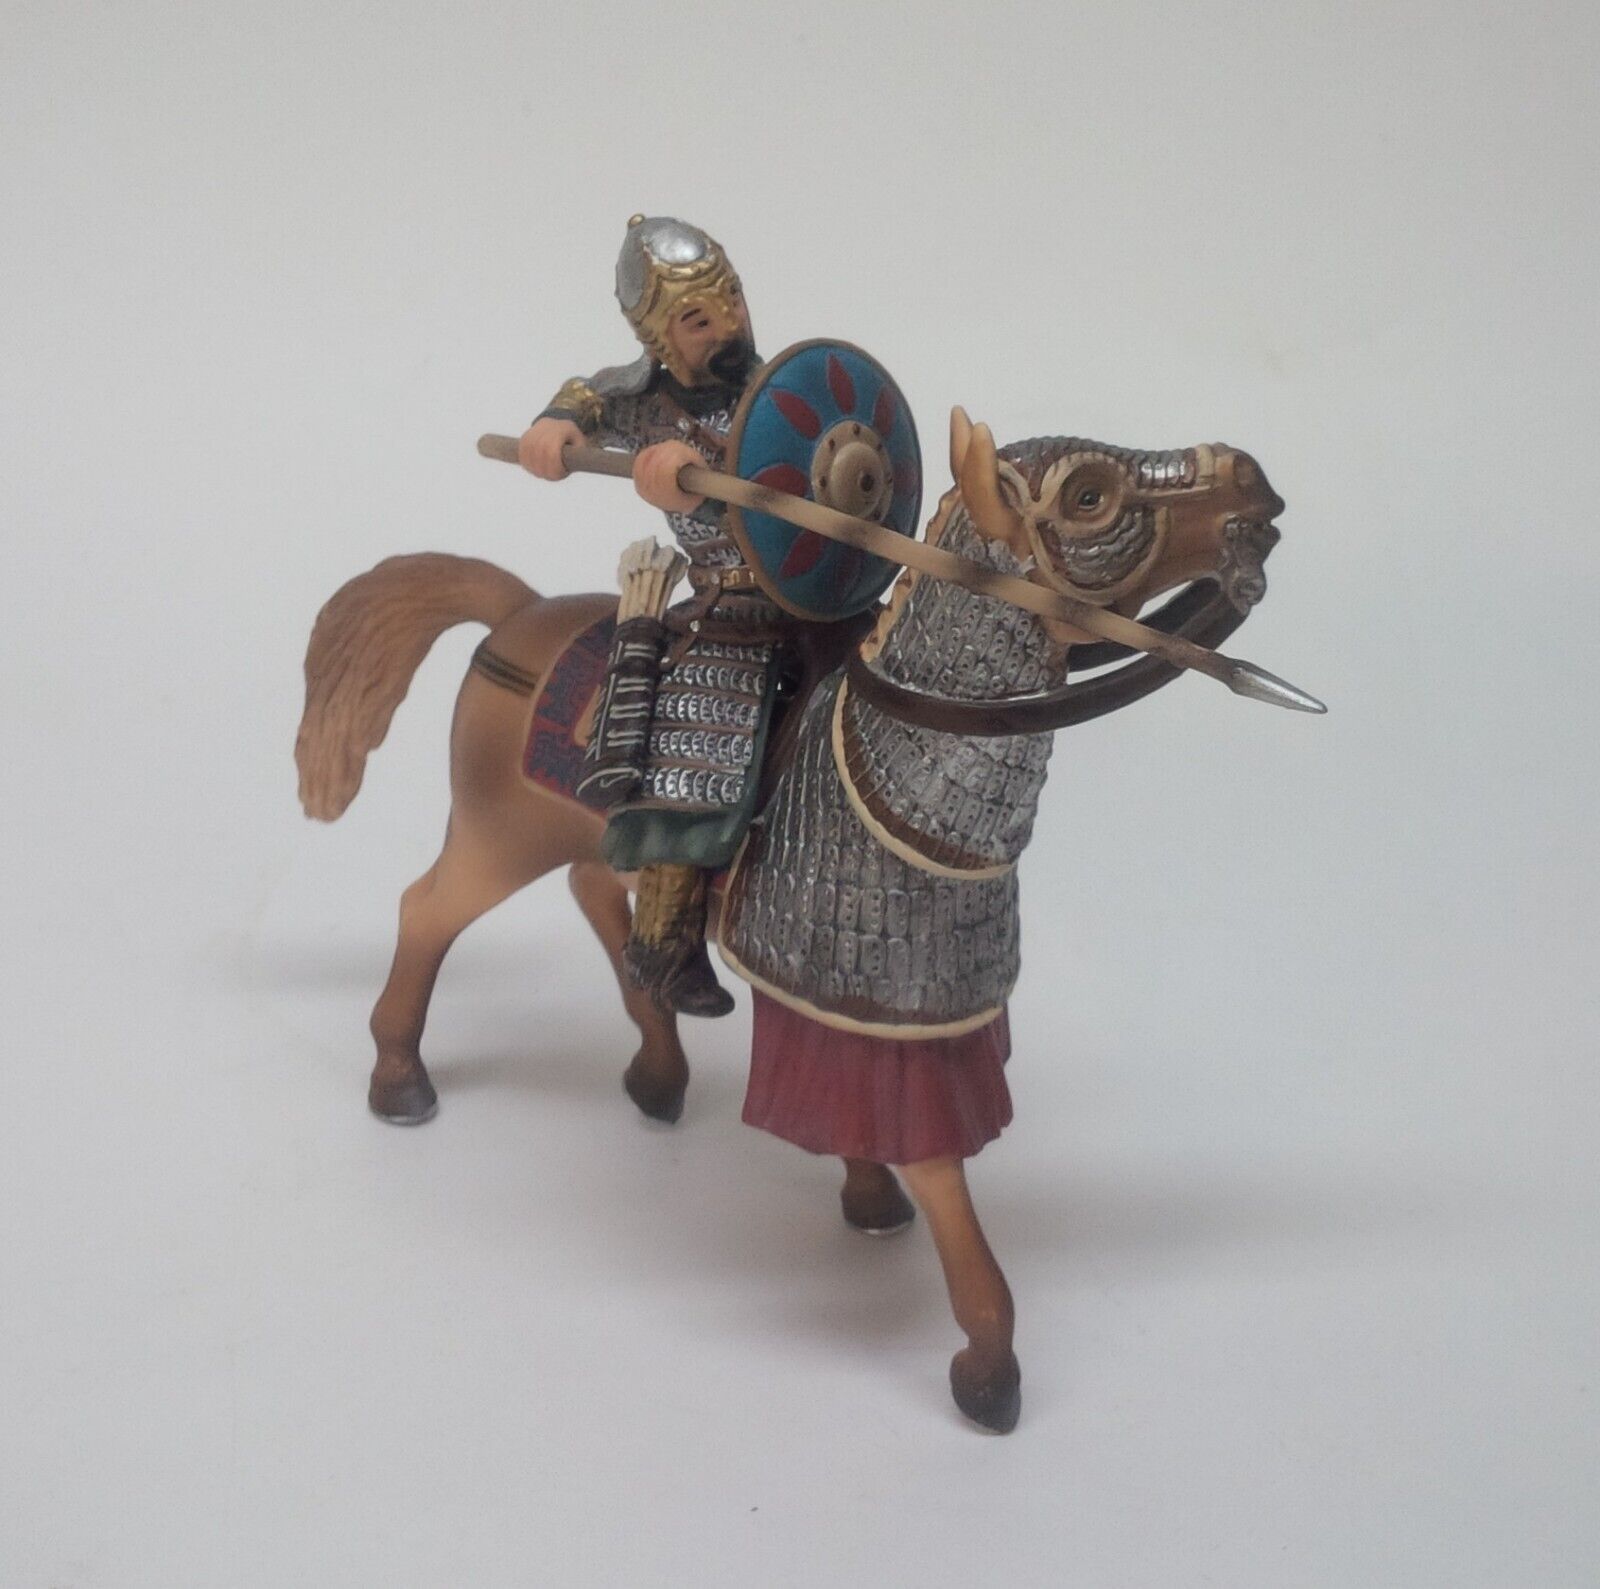 2004 Schleich Warrior with Bamboo Spear on Horse 70040 Retired